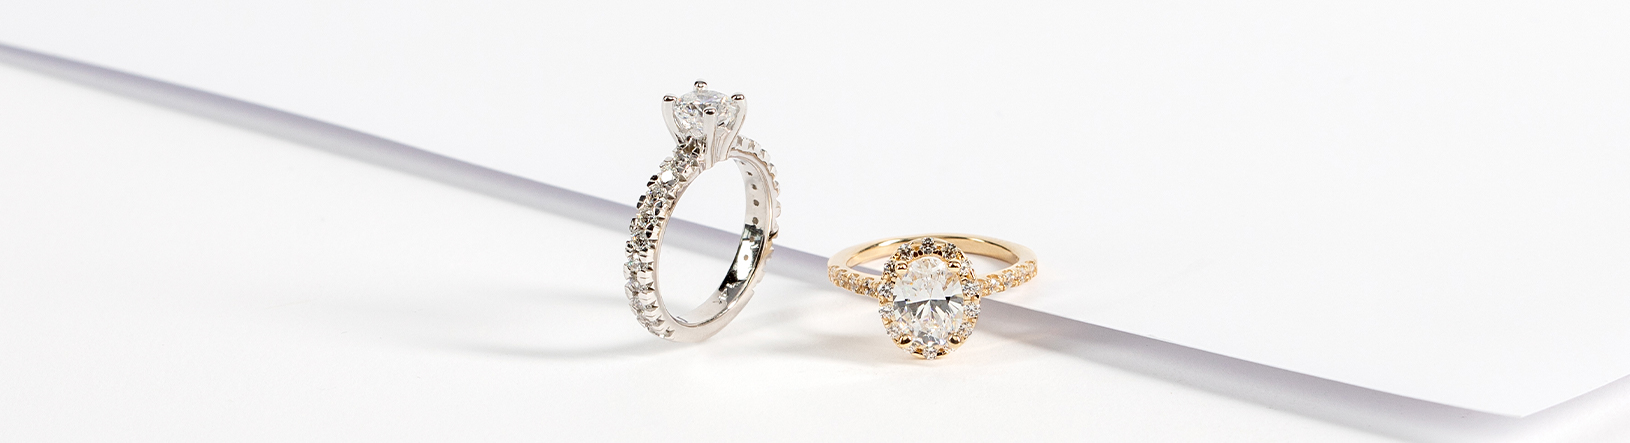 An oval engagement ring and a round engagement ring compared side by side